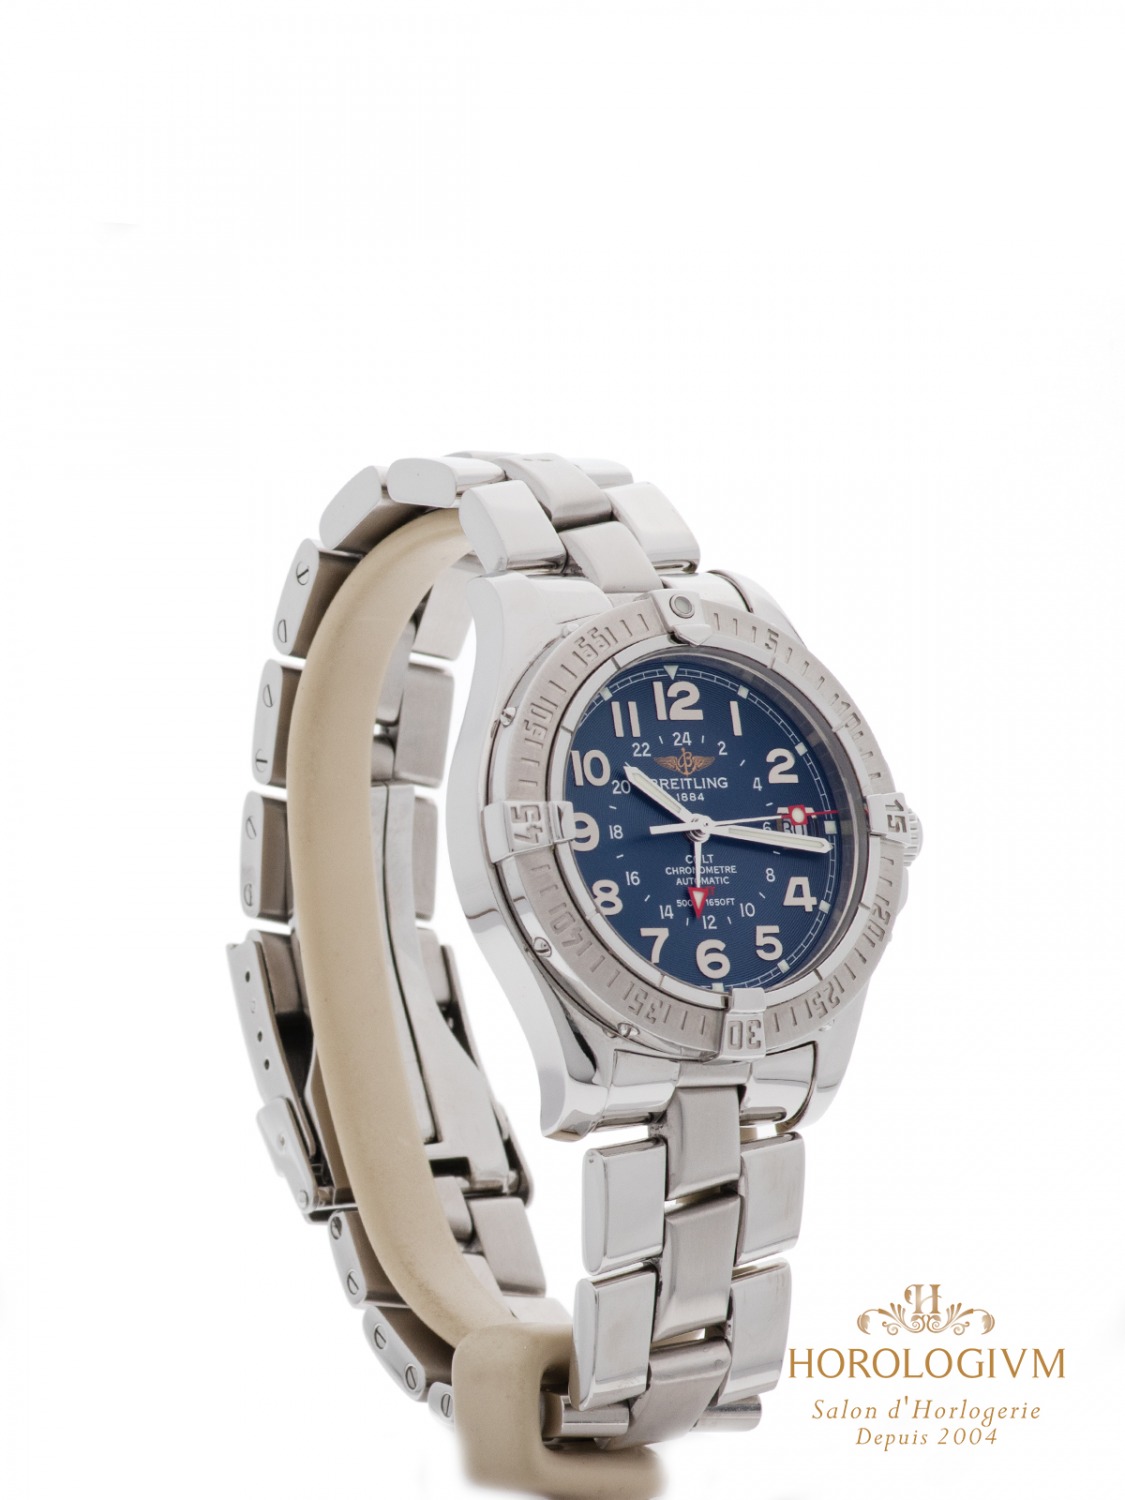 Breitling Colt GMT REF. A32350 watch, silver